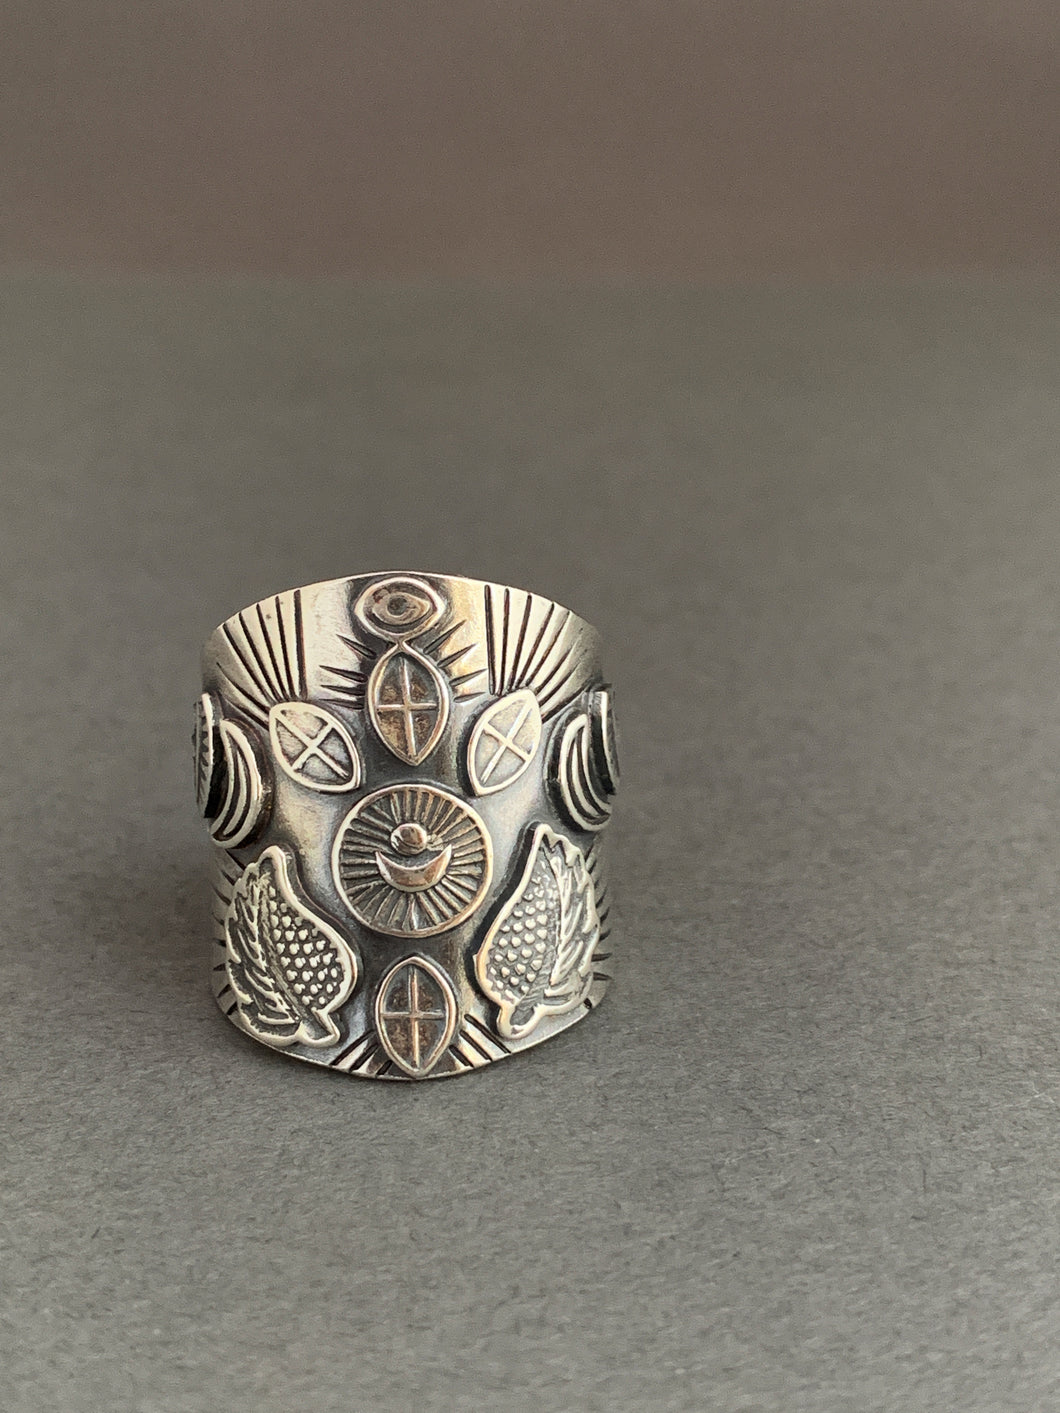 Large size 8 winged moon shield ring